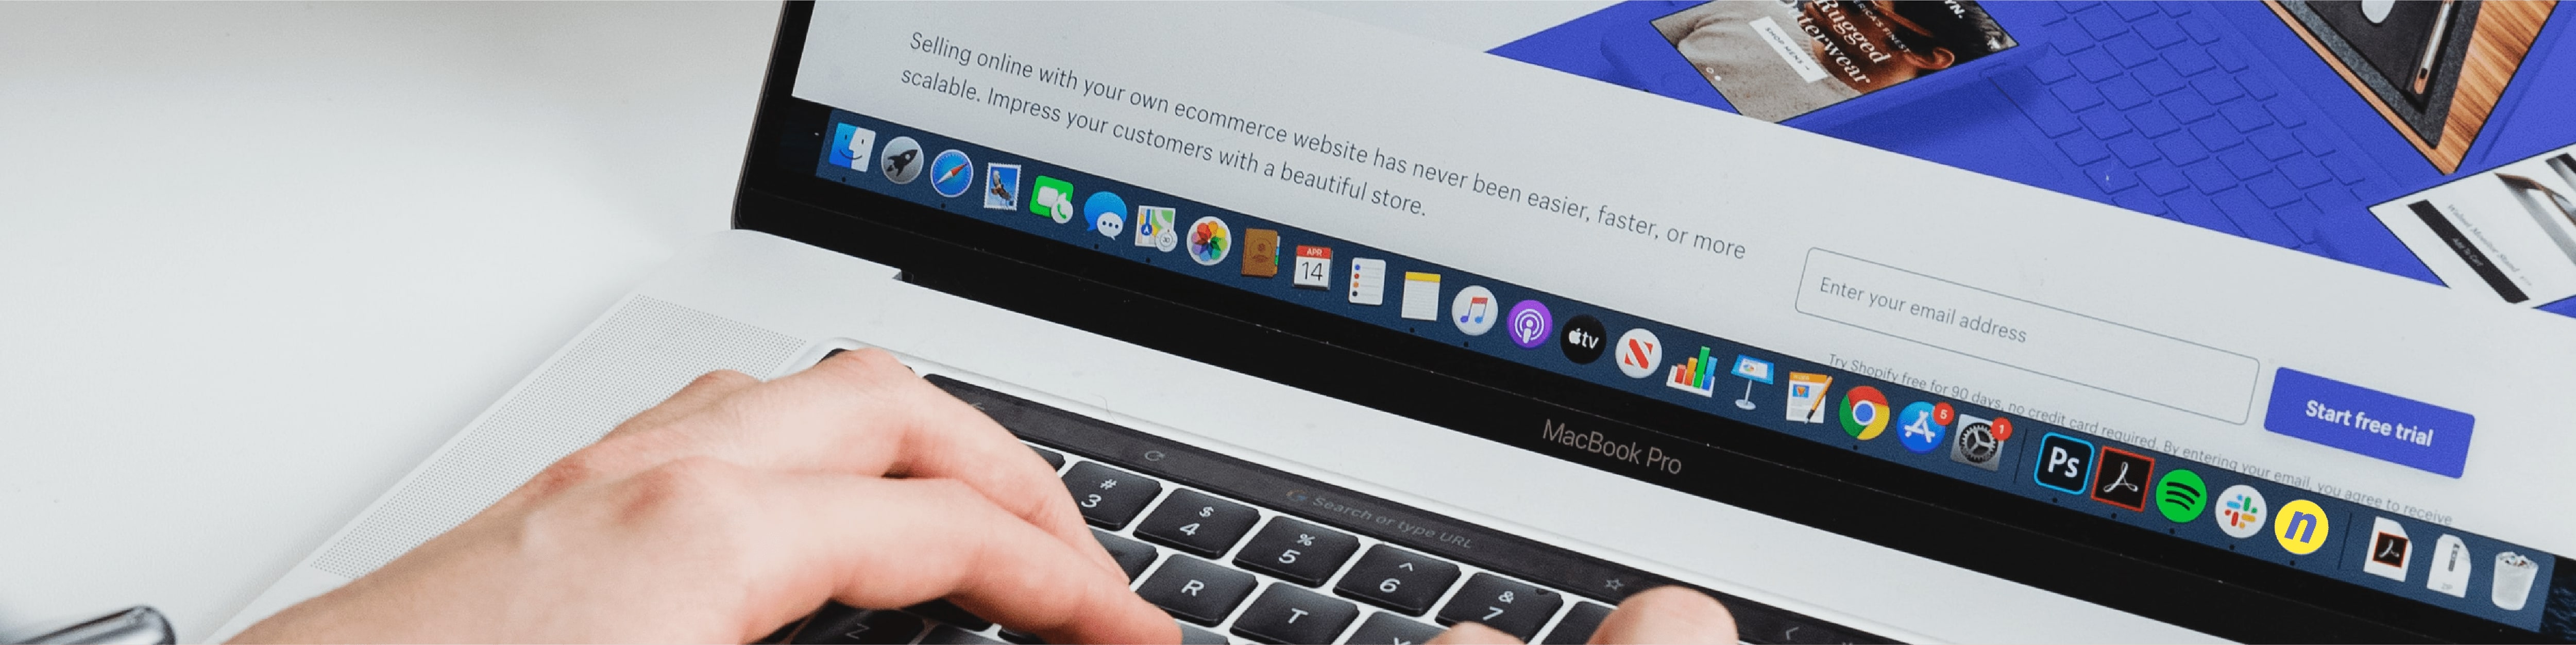 Web marketing banner showing hands typing on a MacBook Pro